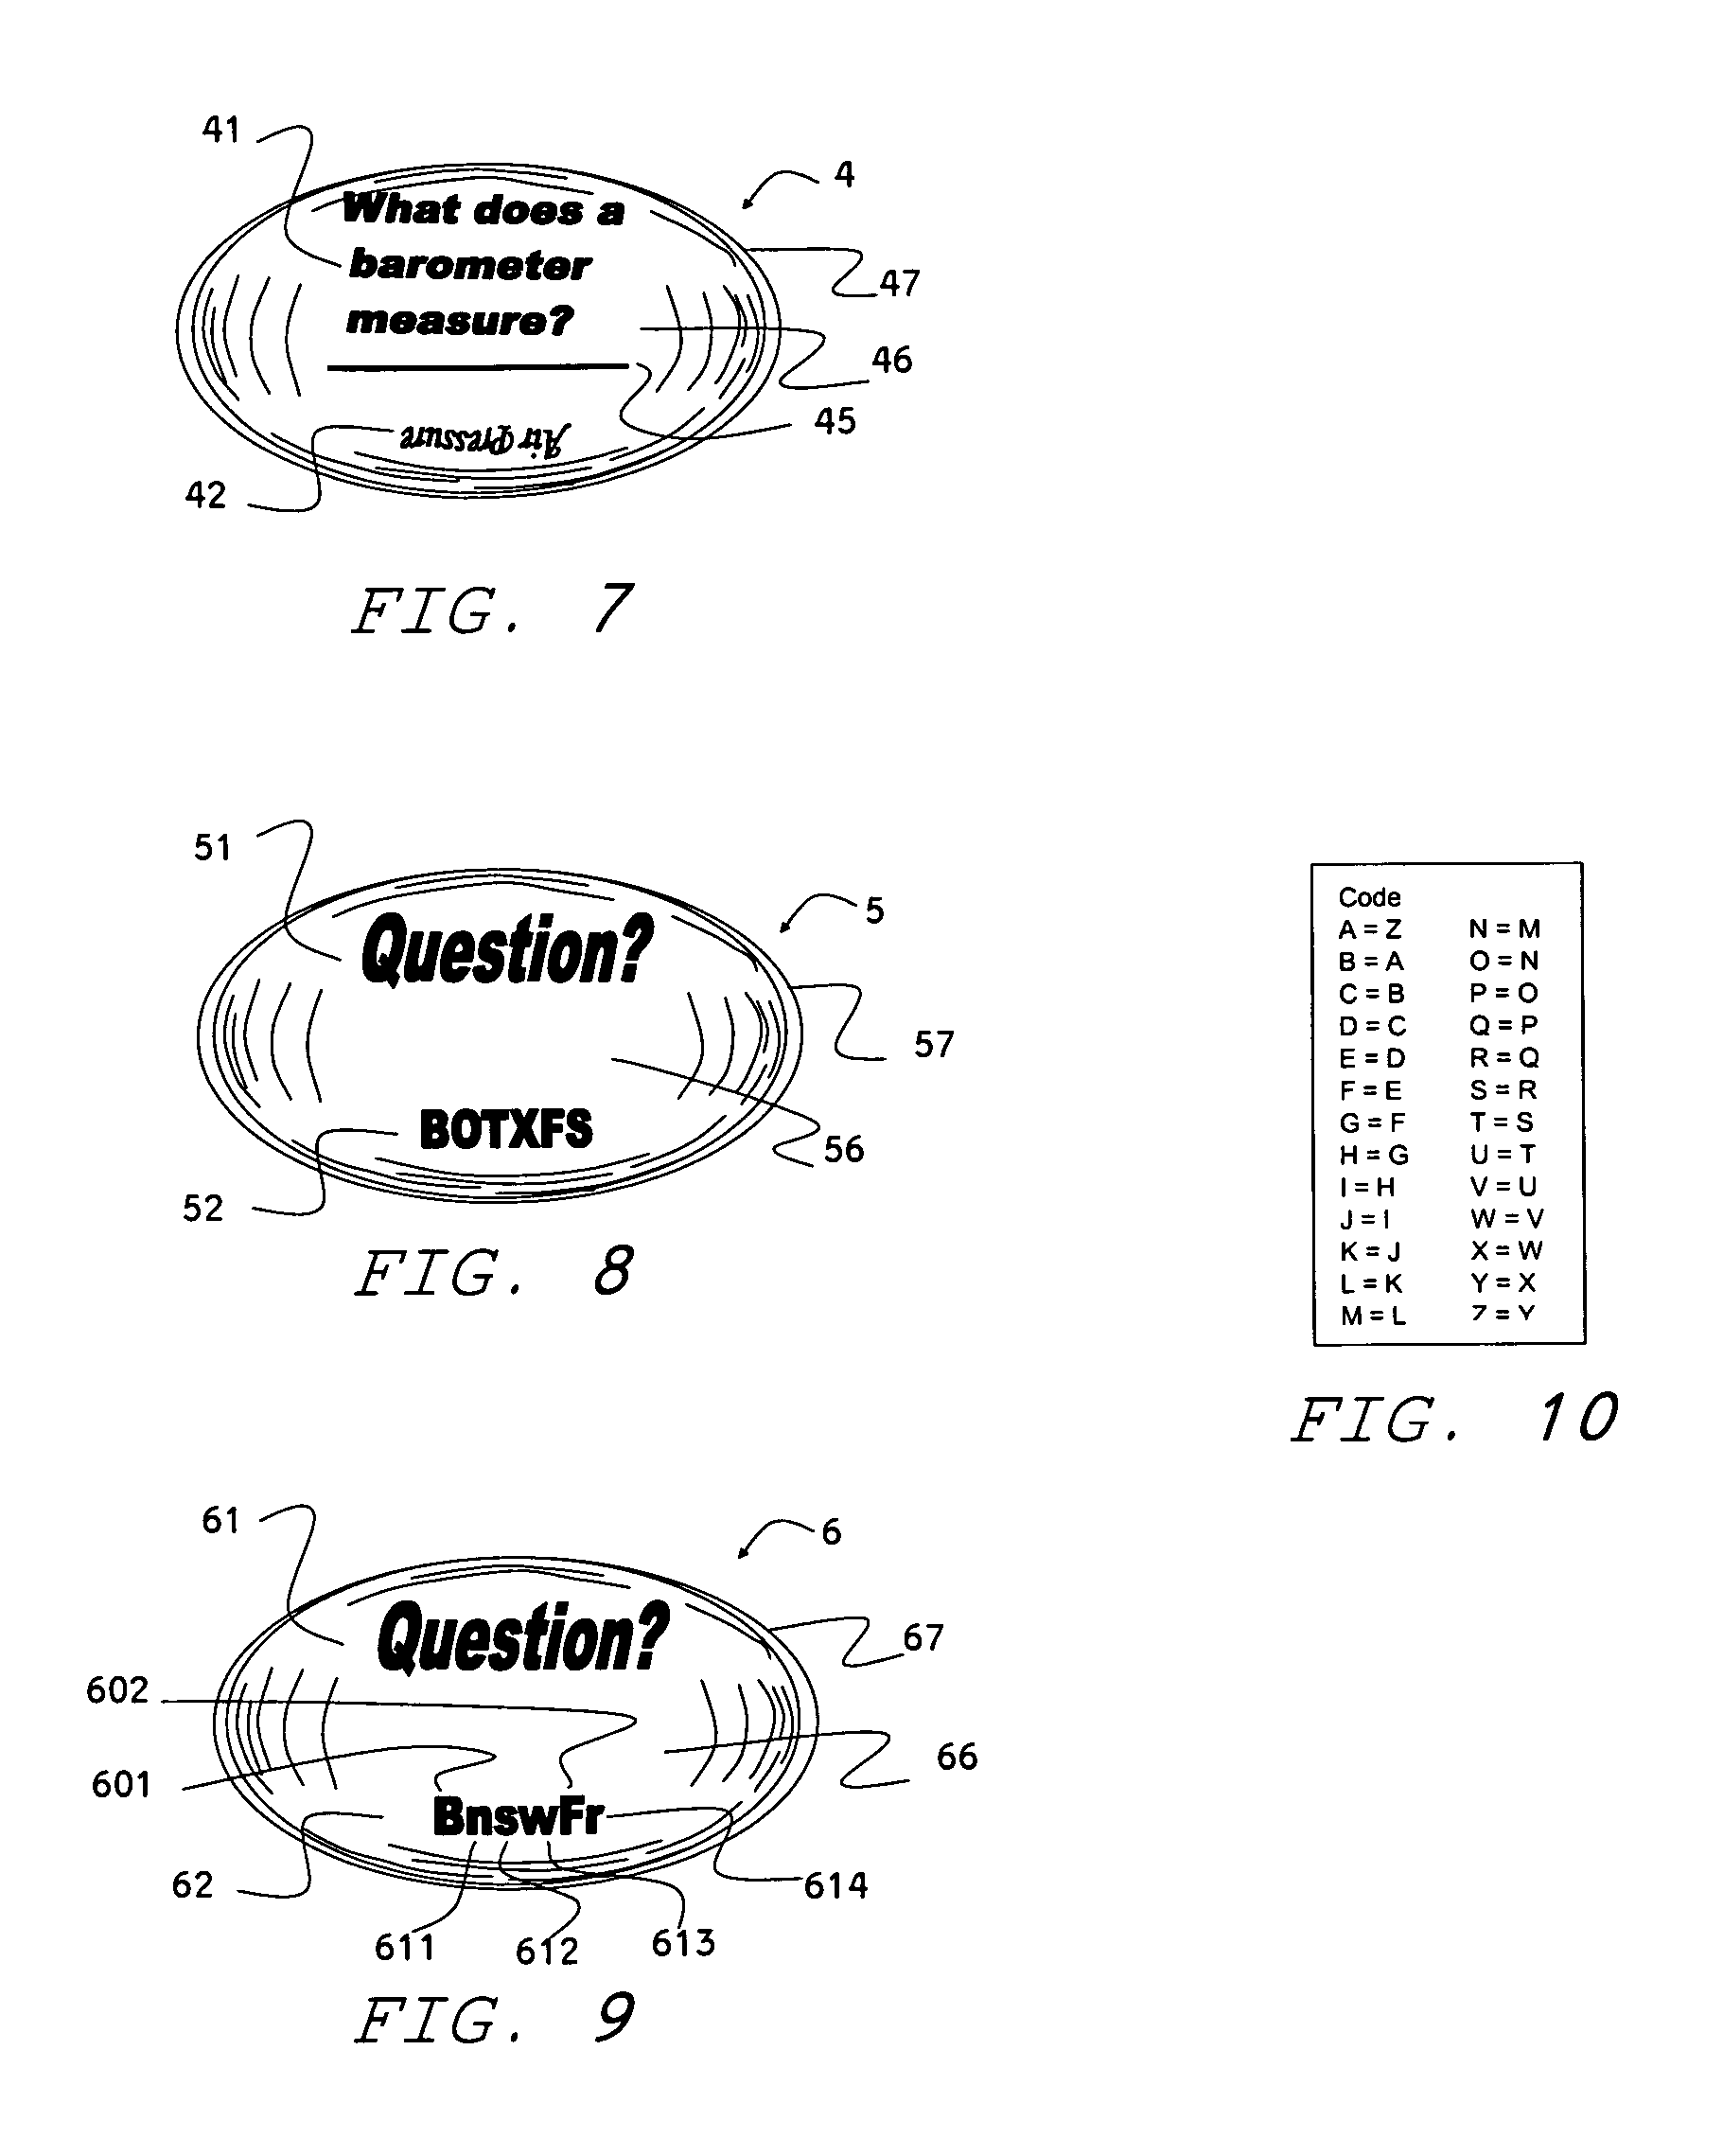 Article of commerce comprising edible substrate and game elements